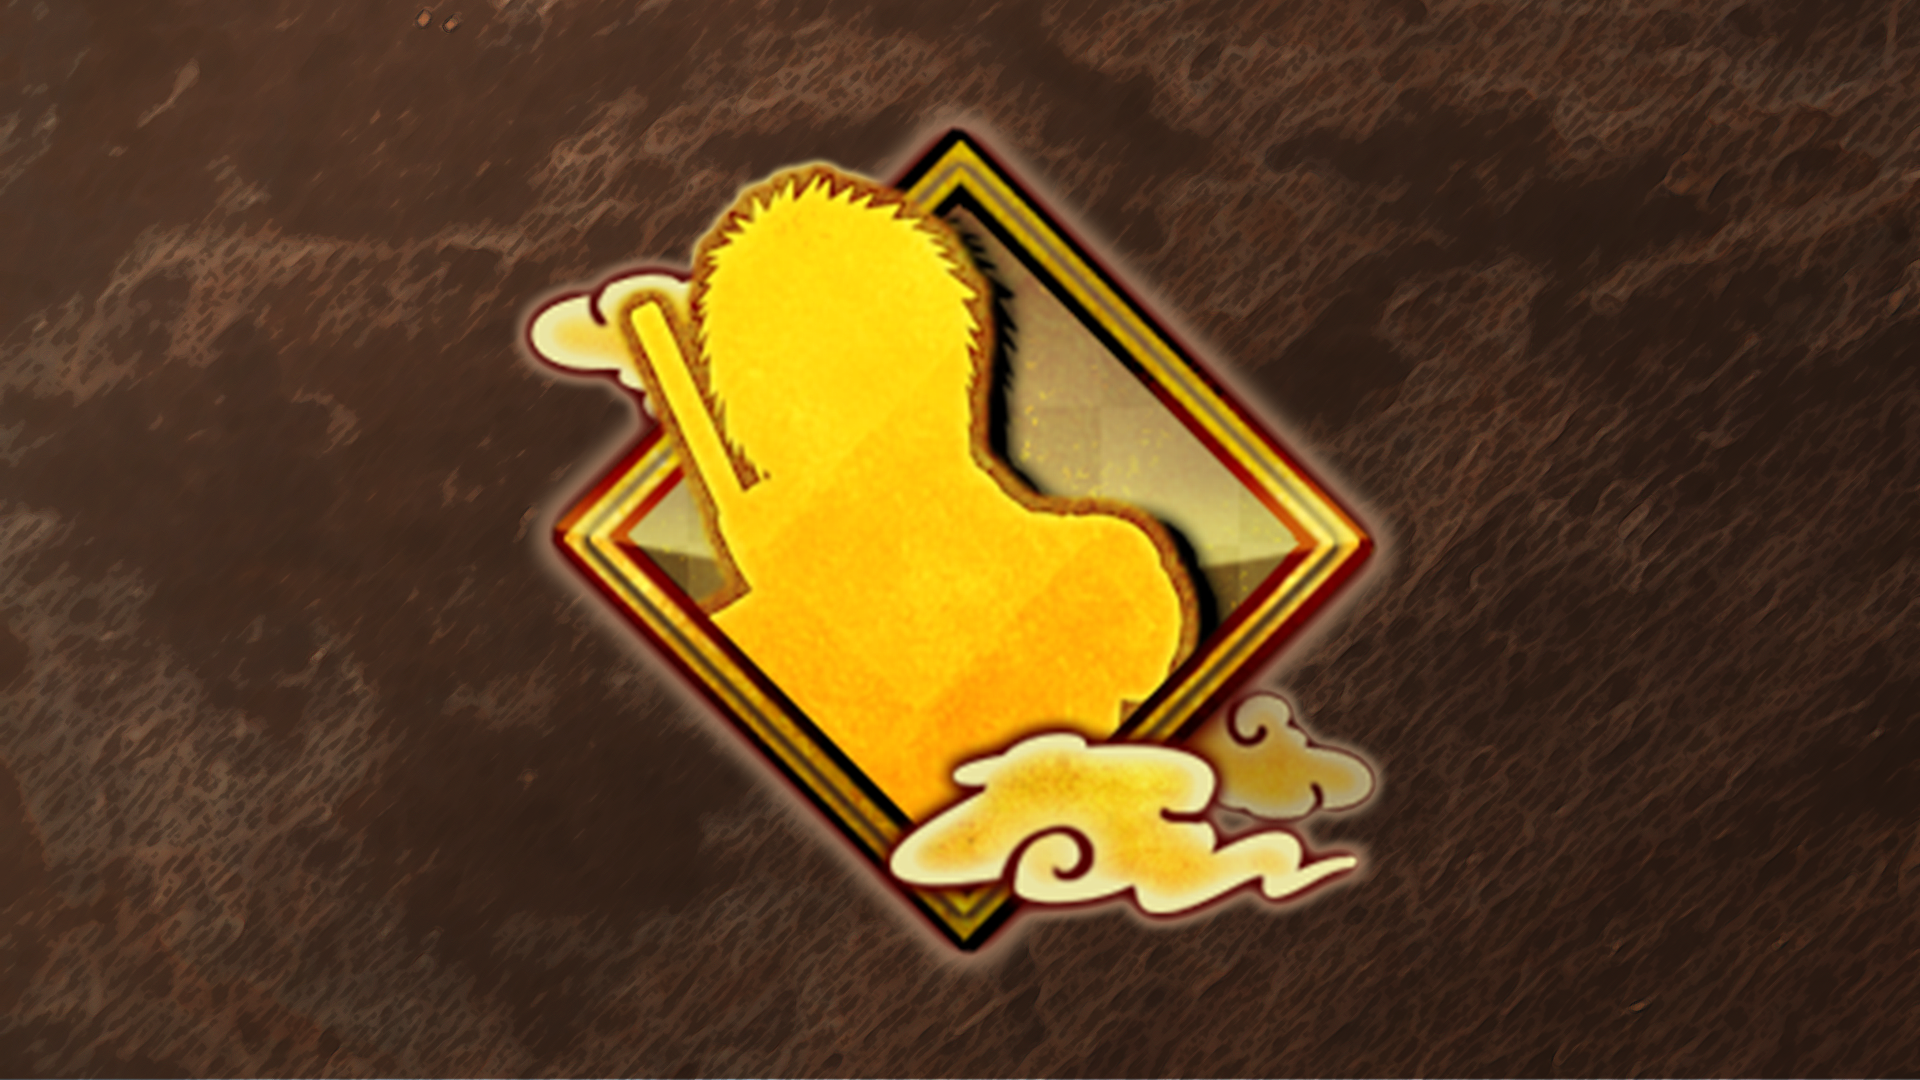 Icon for End of the Coastline Battle